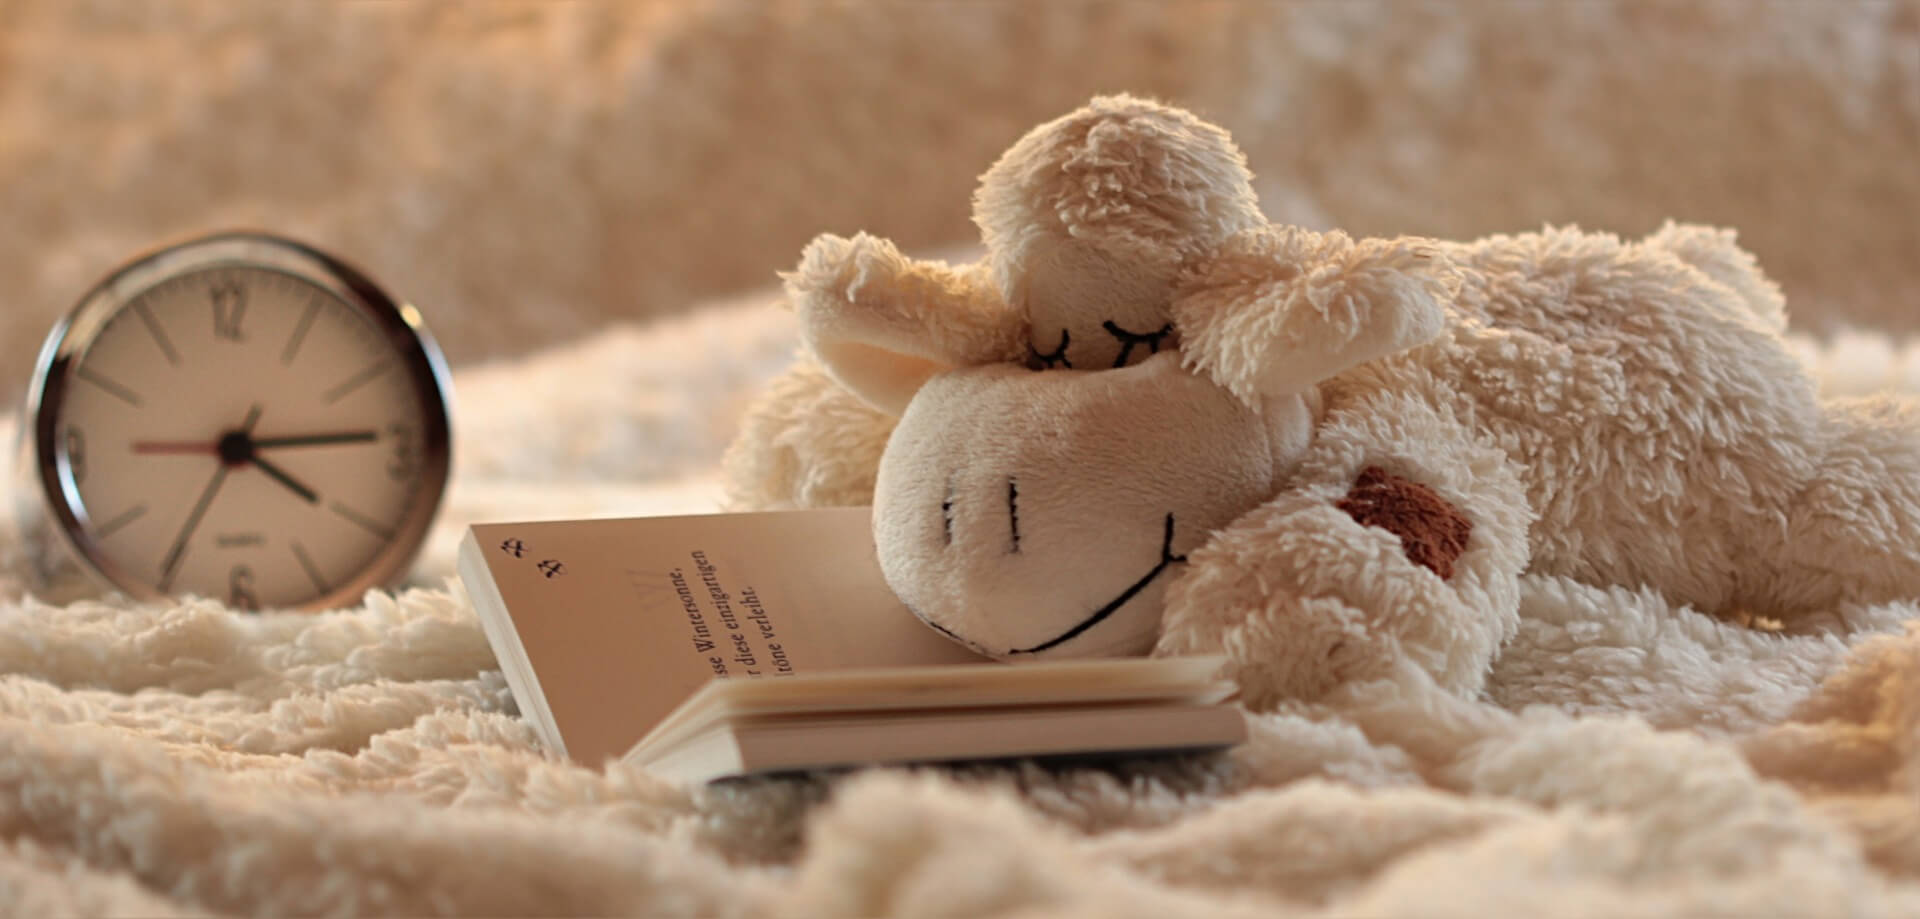 Reading in bed helps calm the mind before falling asleep